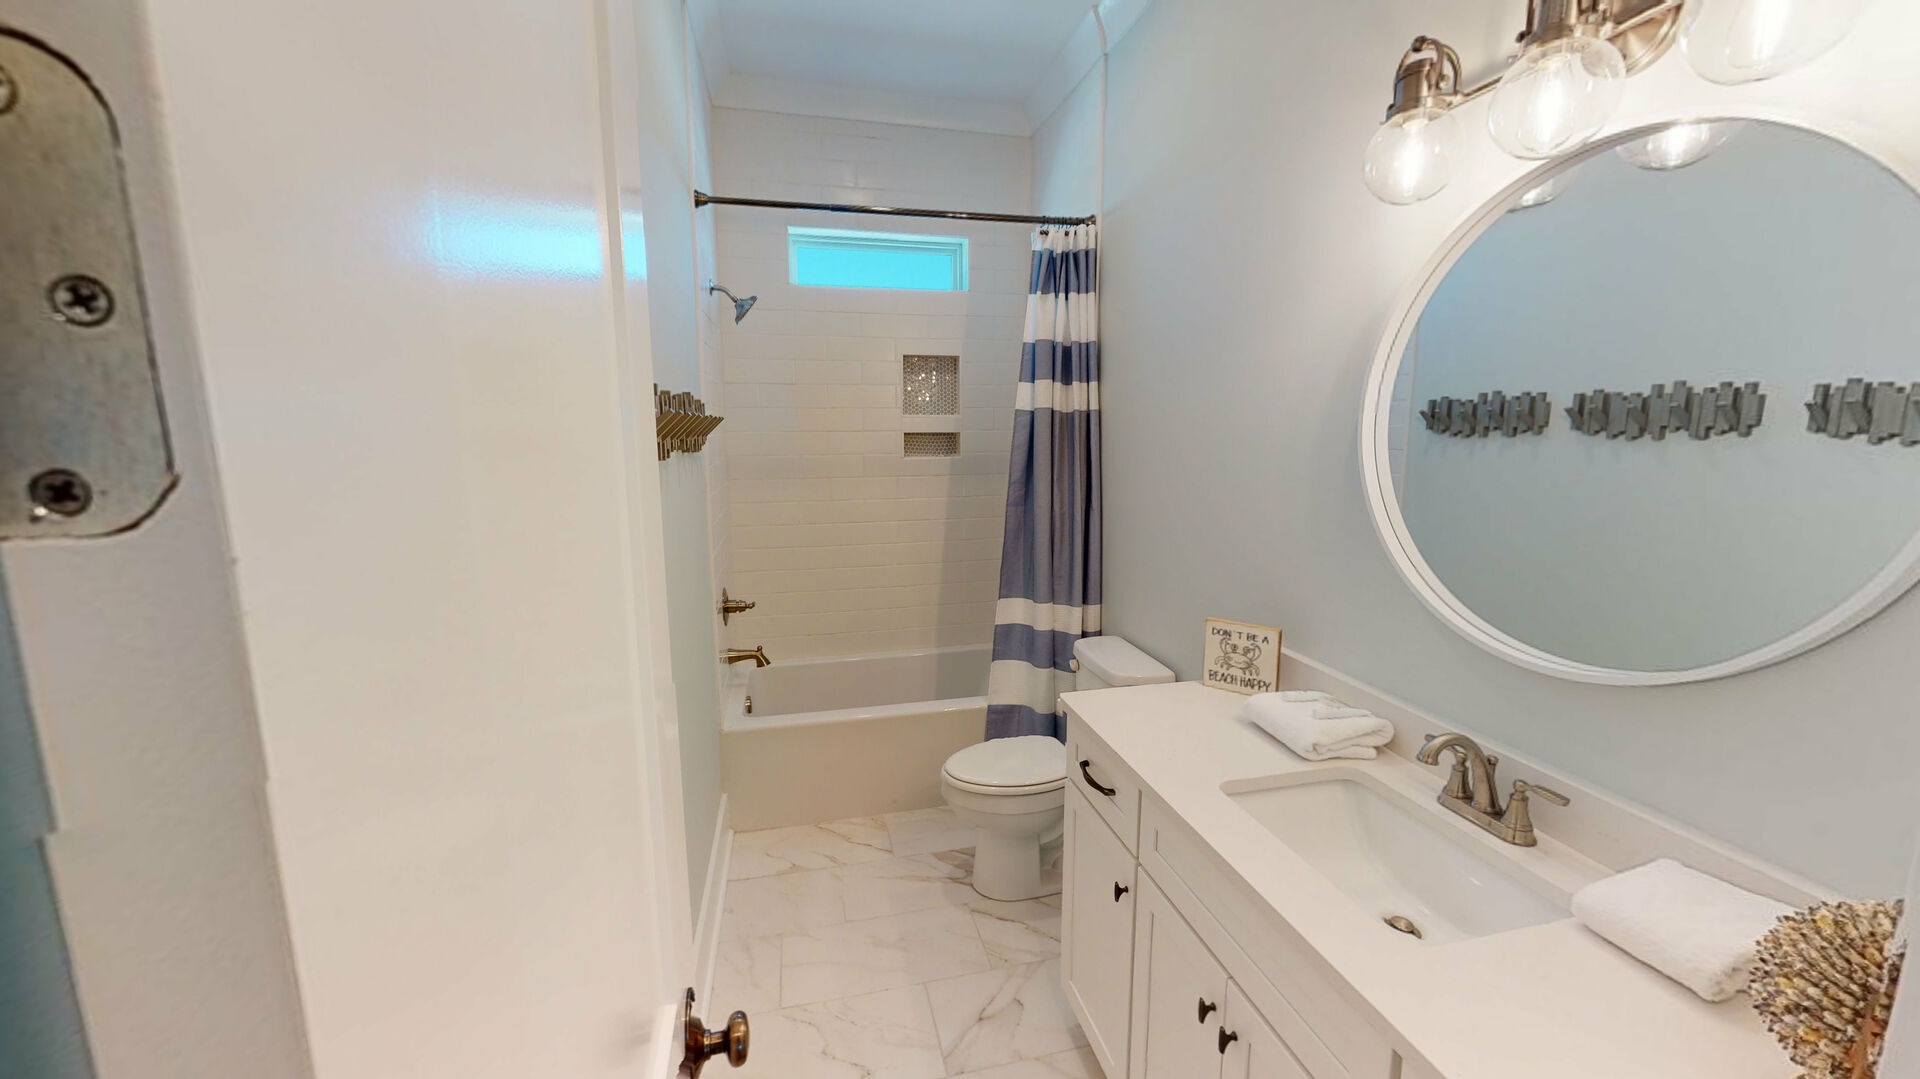 Bunkroom bath located near 2nd living area.  Guests in both bunkrooms share this space